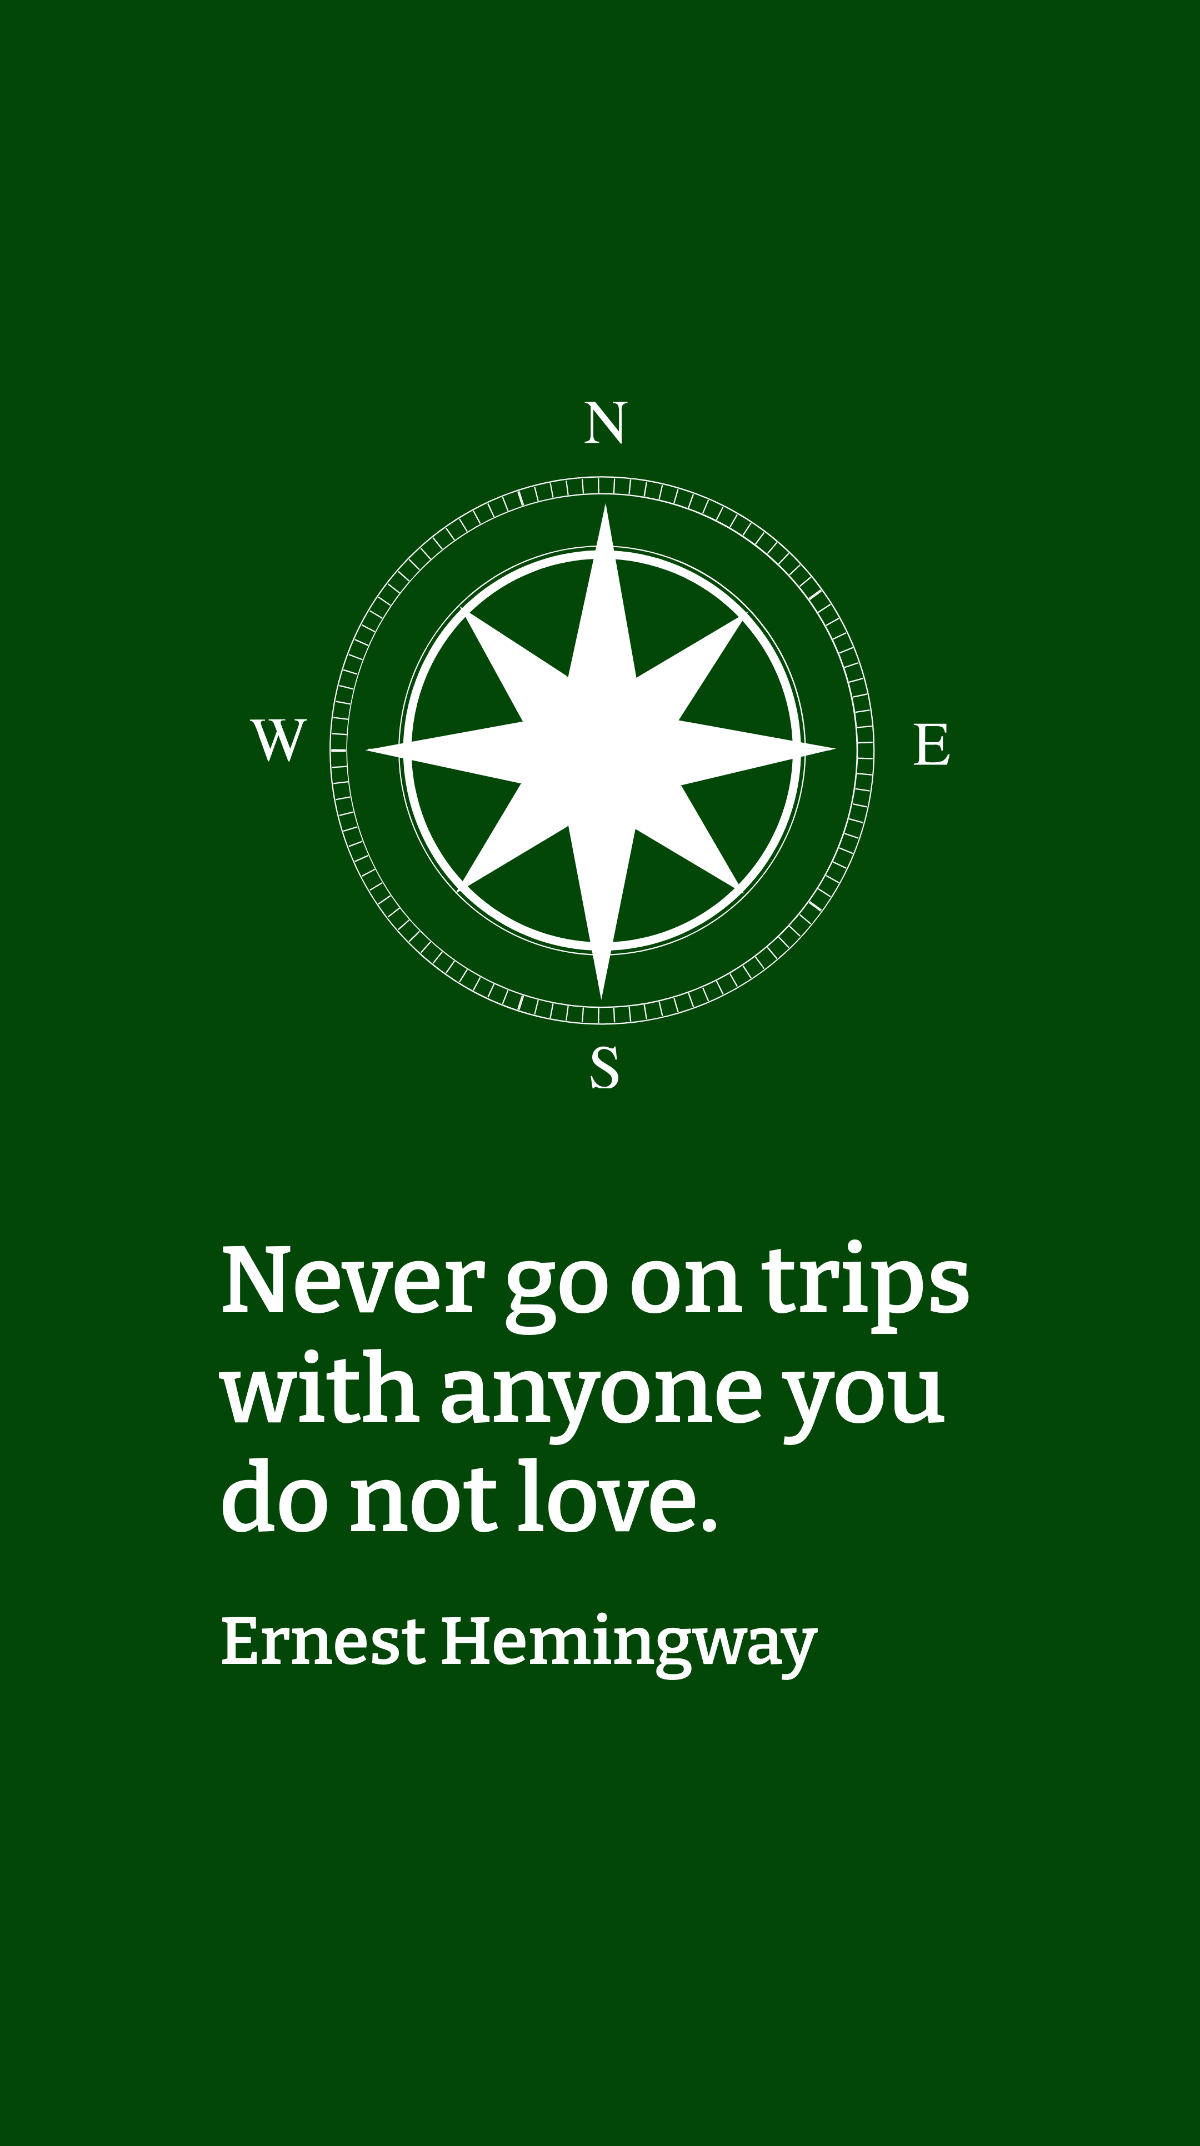 Free Ernest Hemingway - Never go on trips with anyone you do not love. Template